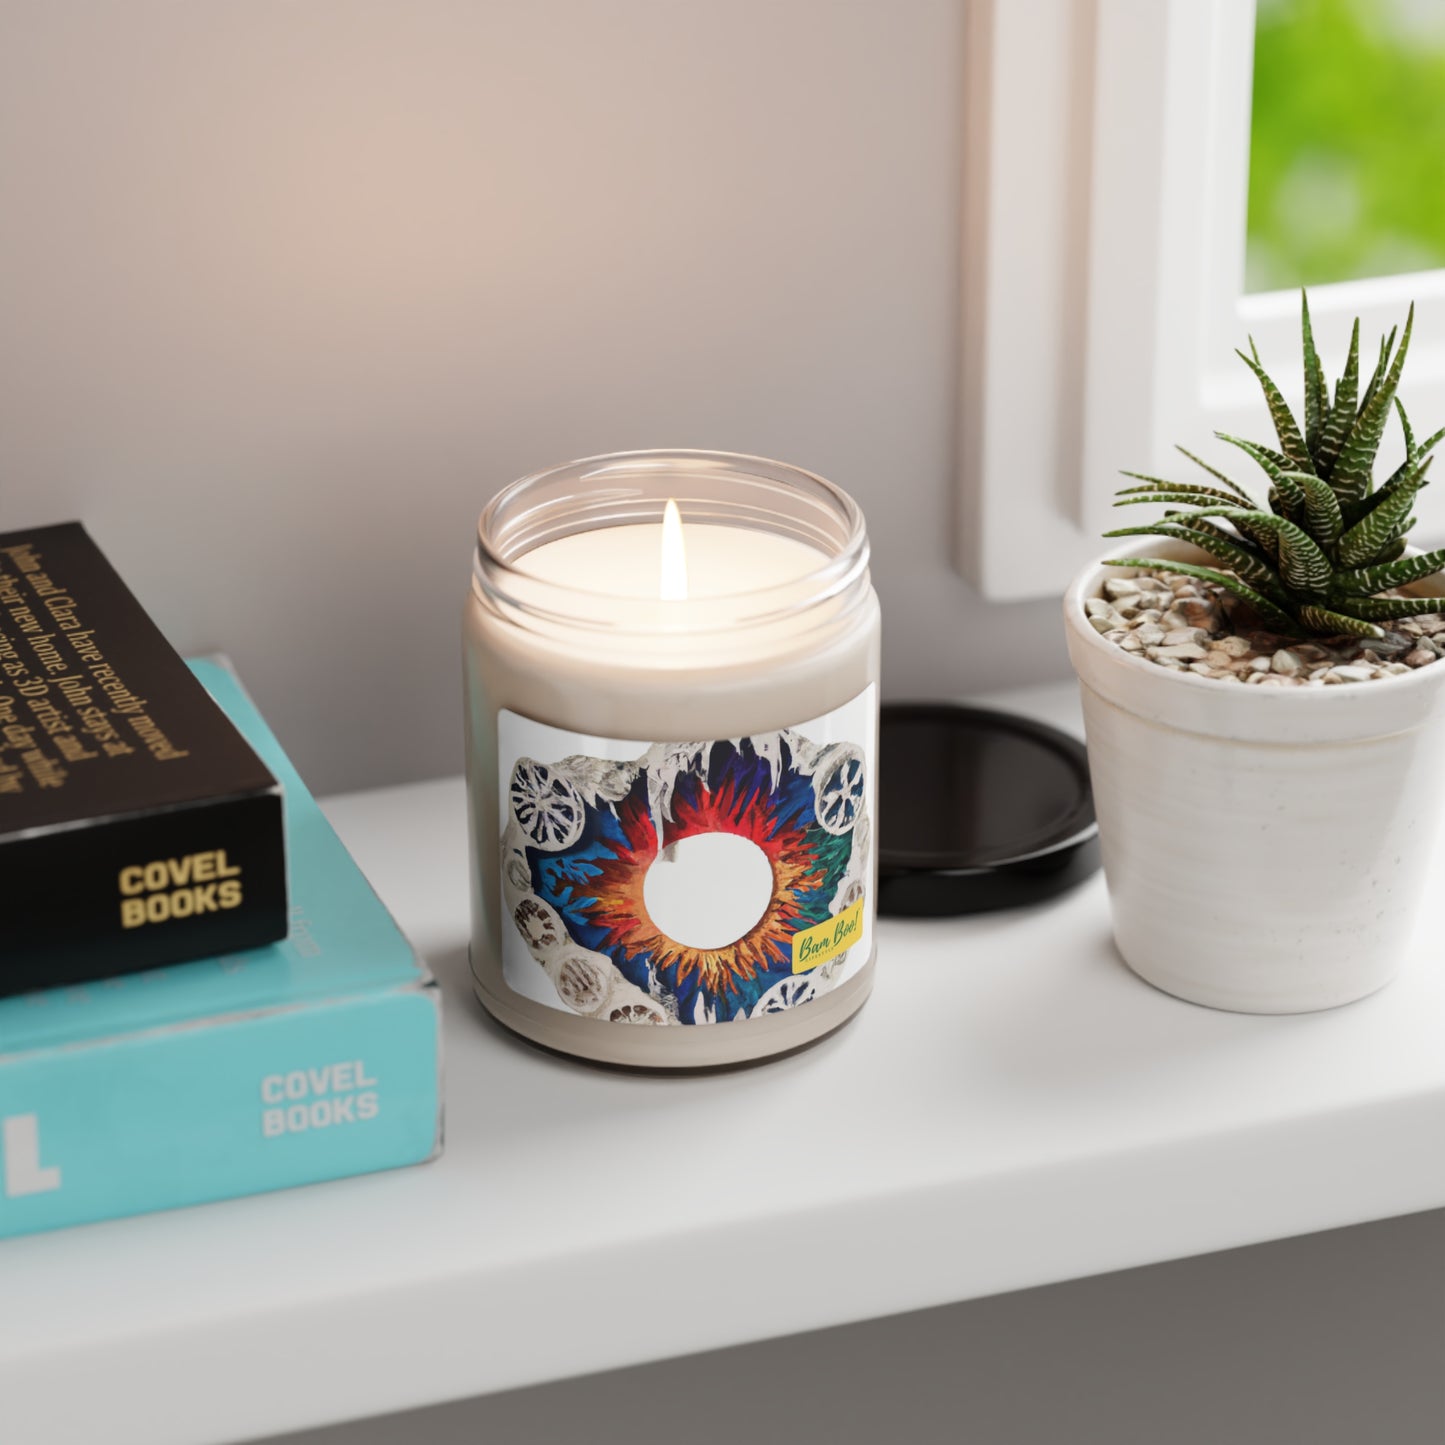 'My Shapes of Life' - Bam Boo! Lifestyle Eco-friendly Soy Candle